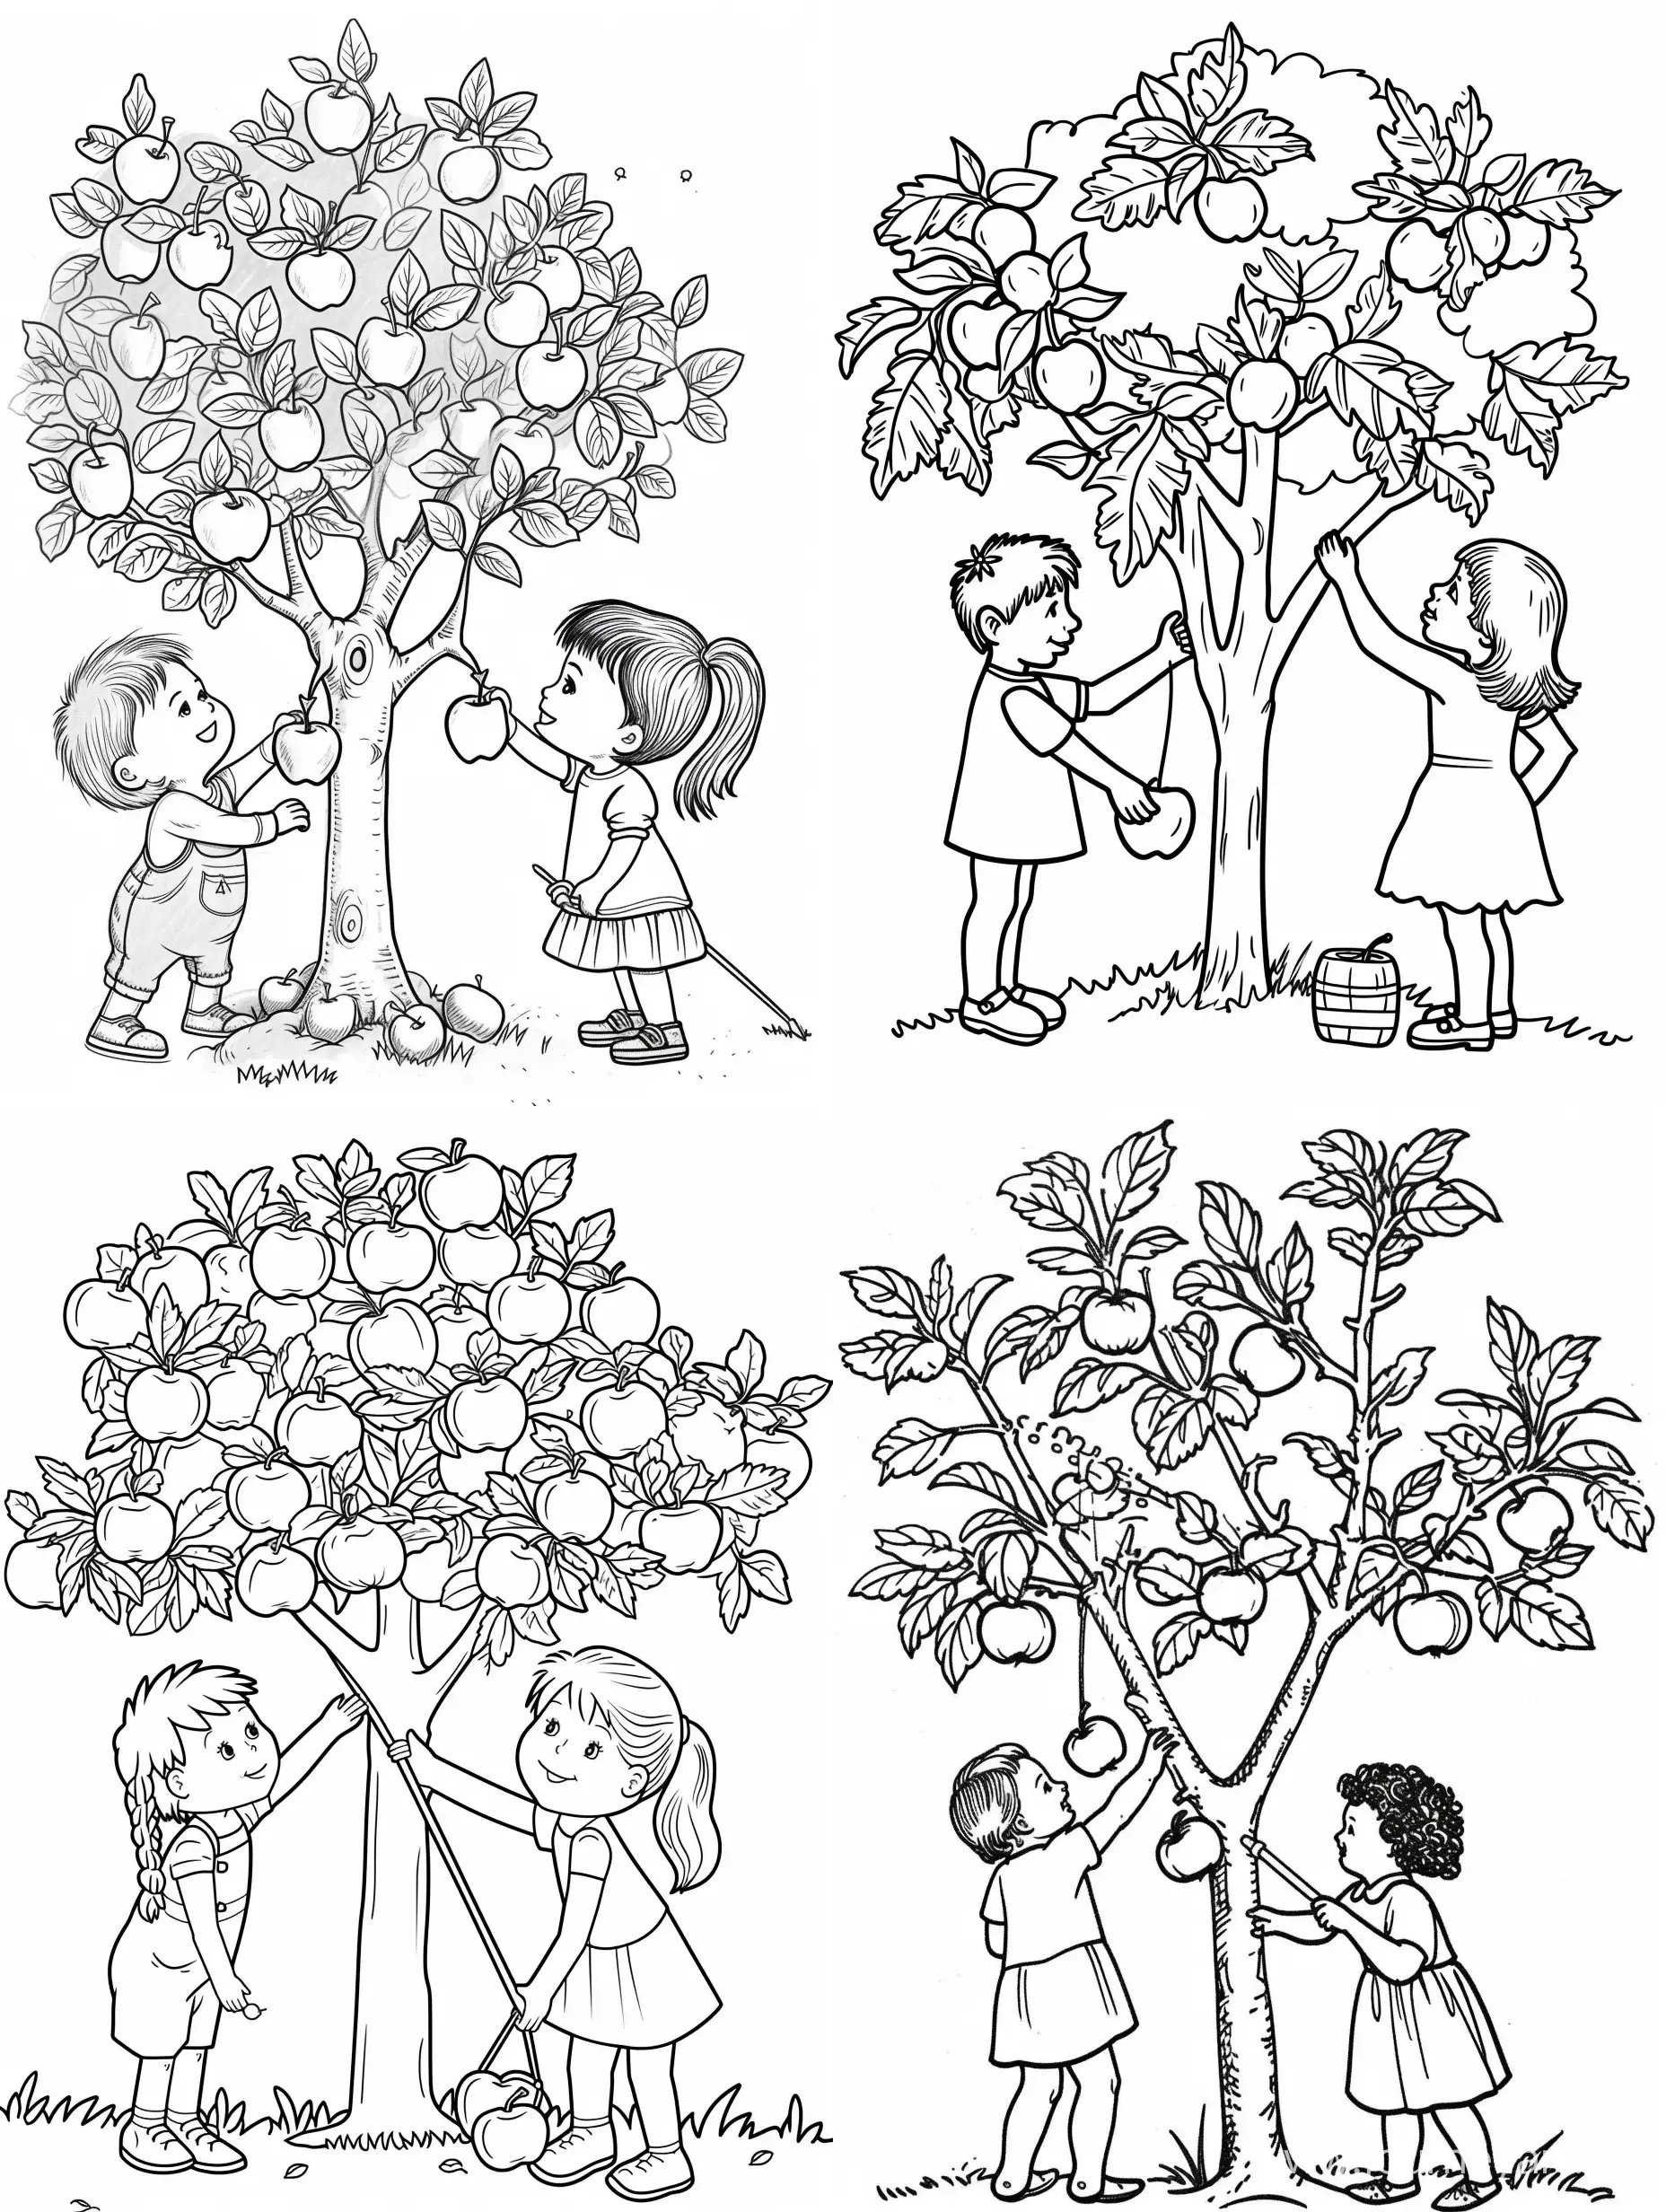 Children-Harvesting-Apples-in-a-Playful-Orchard